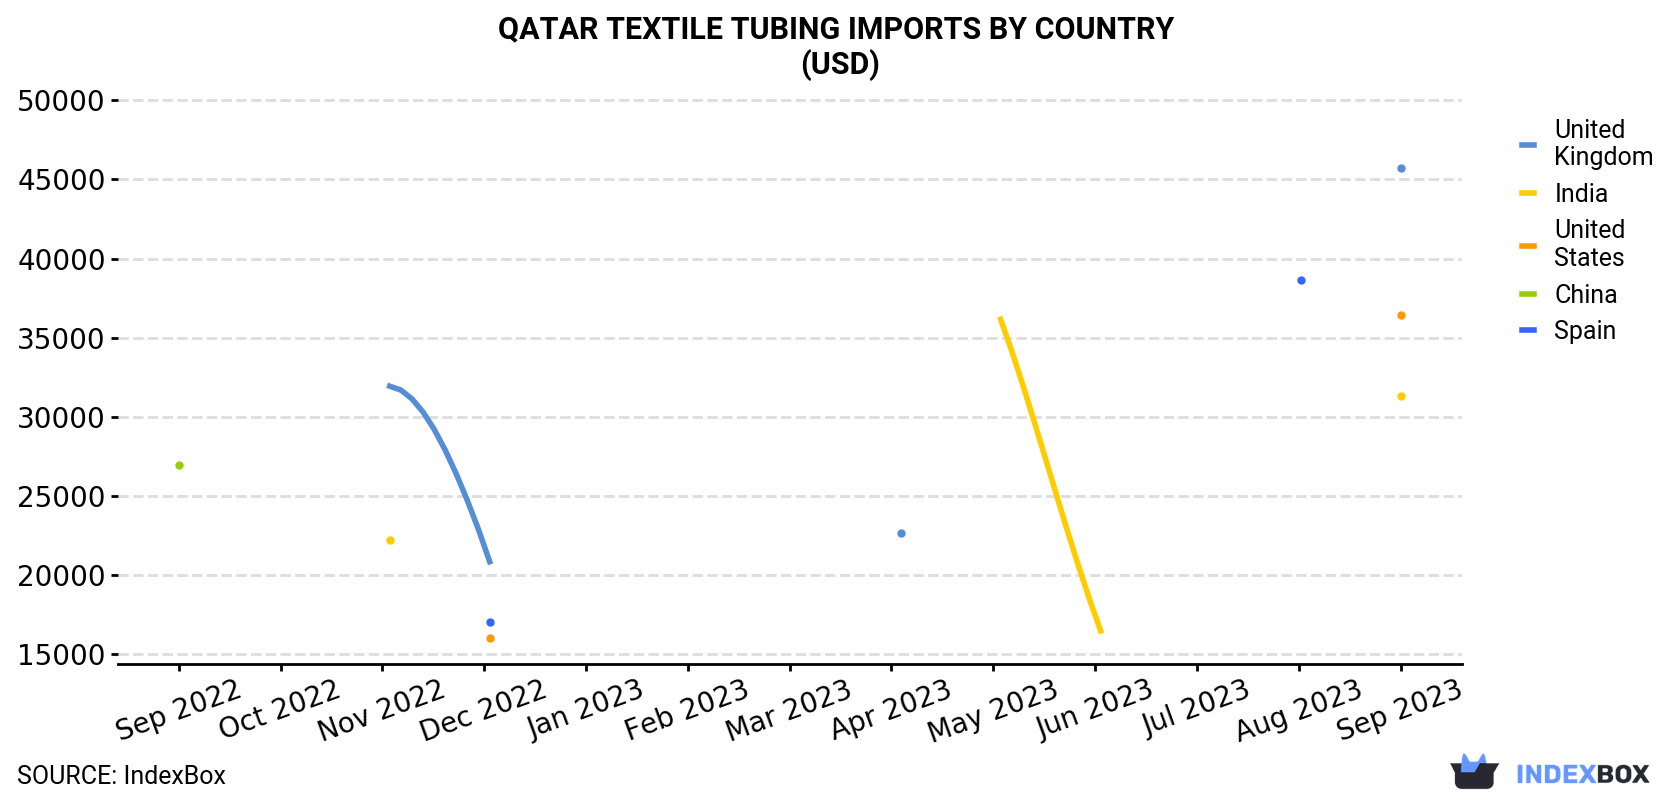 Qatar Textile Tubing Imports By Country (USD)